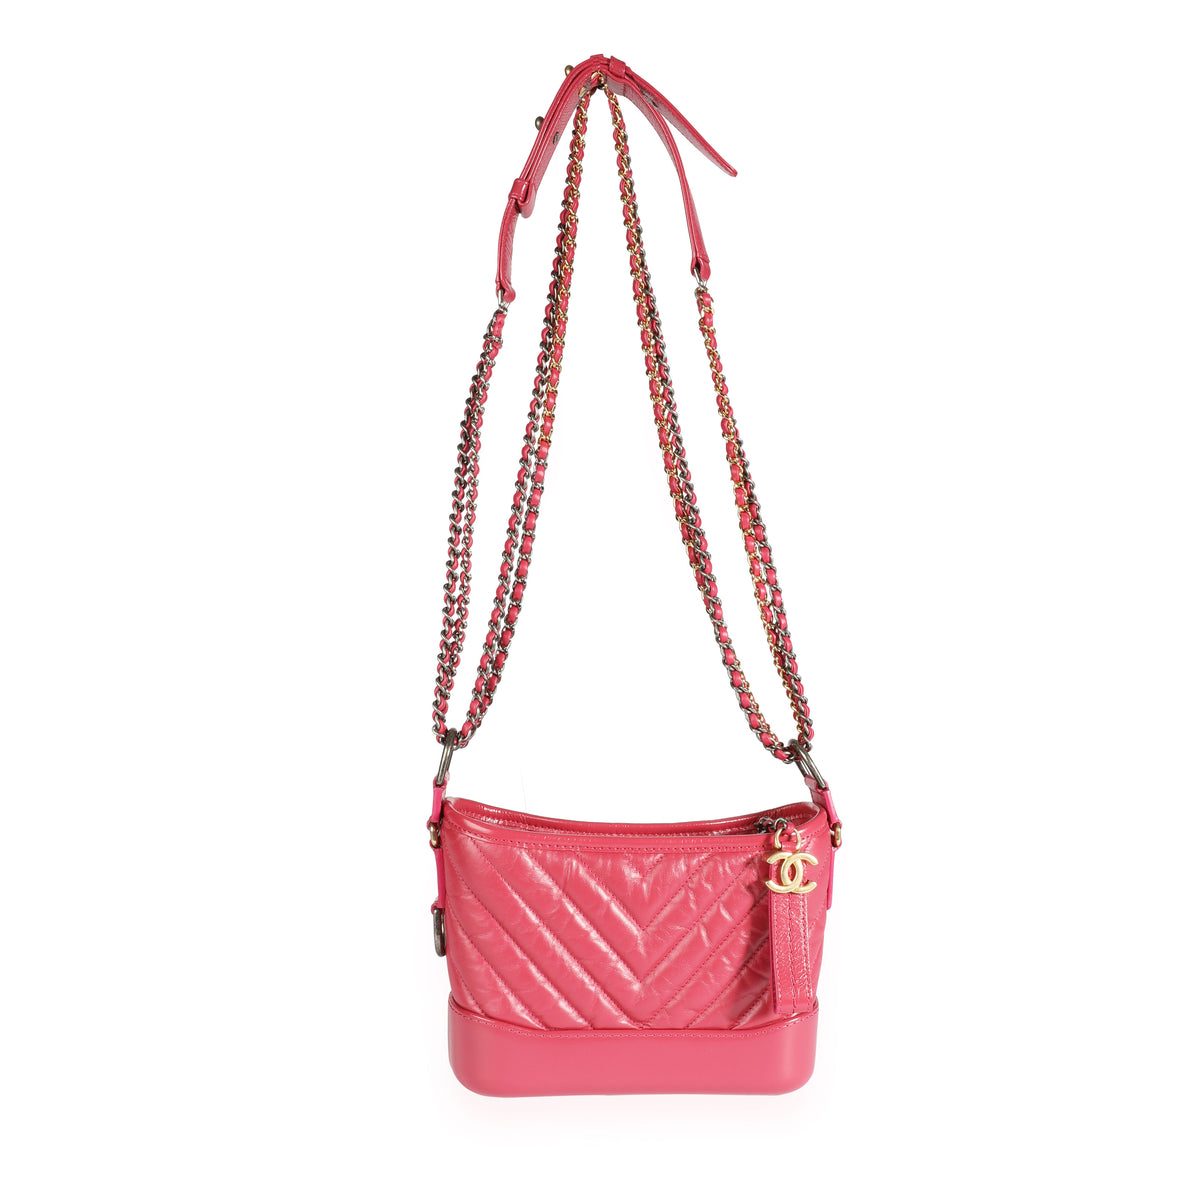 Chanel Pink Aged Calfskin Chevron Quilted Small Gabrielle Hobo, myGemma, SG